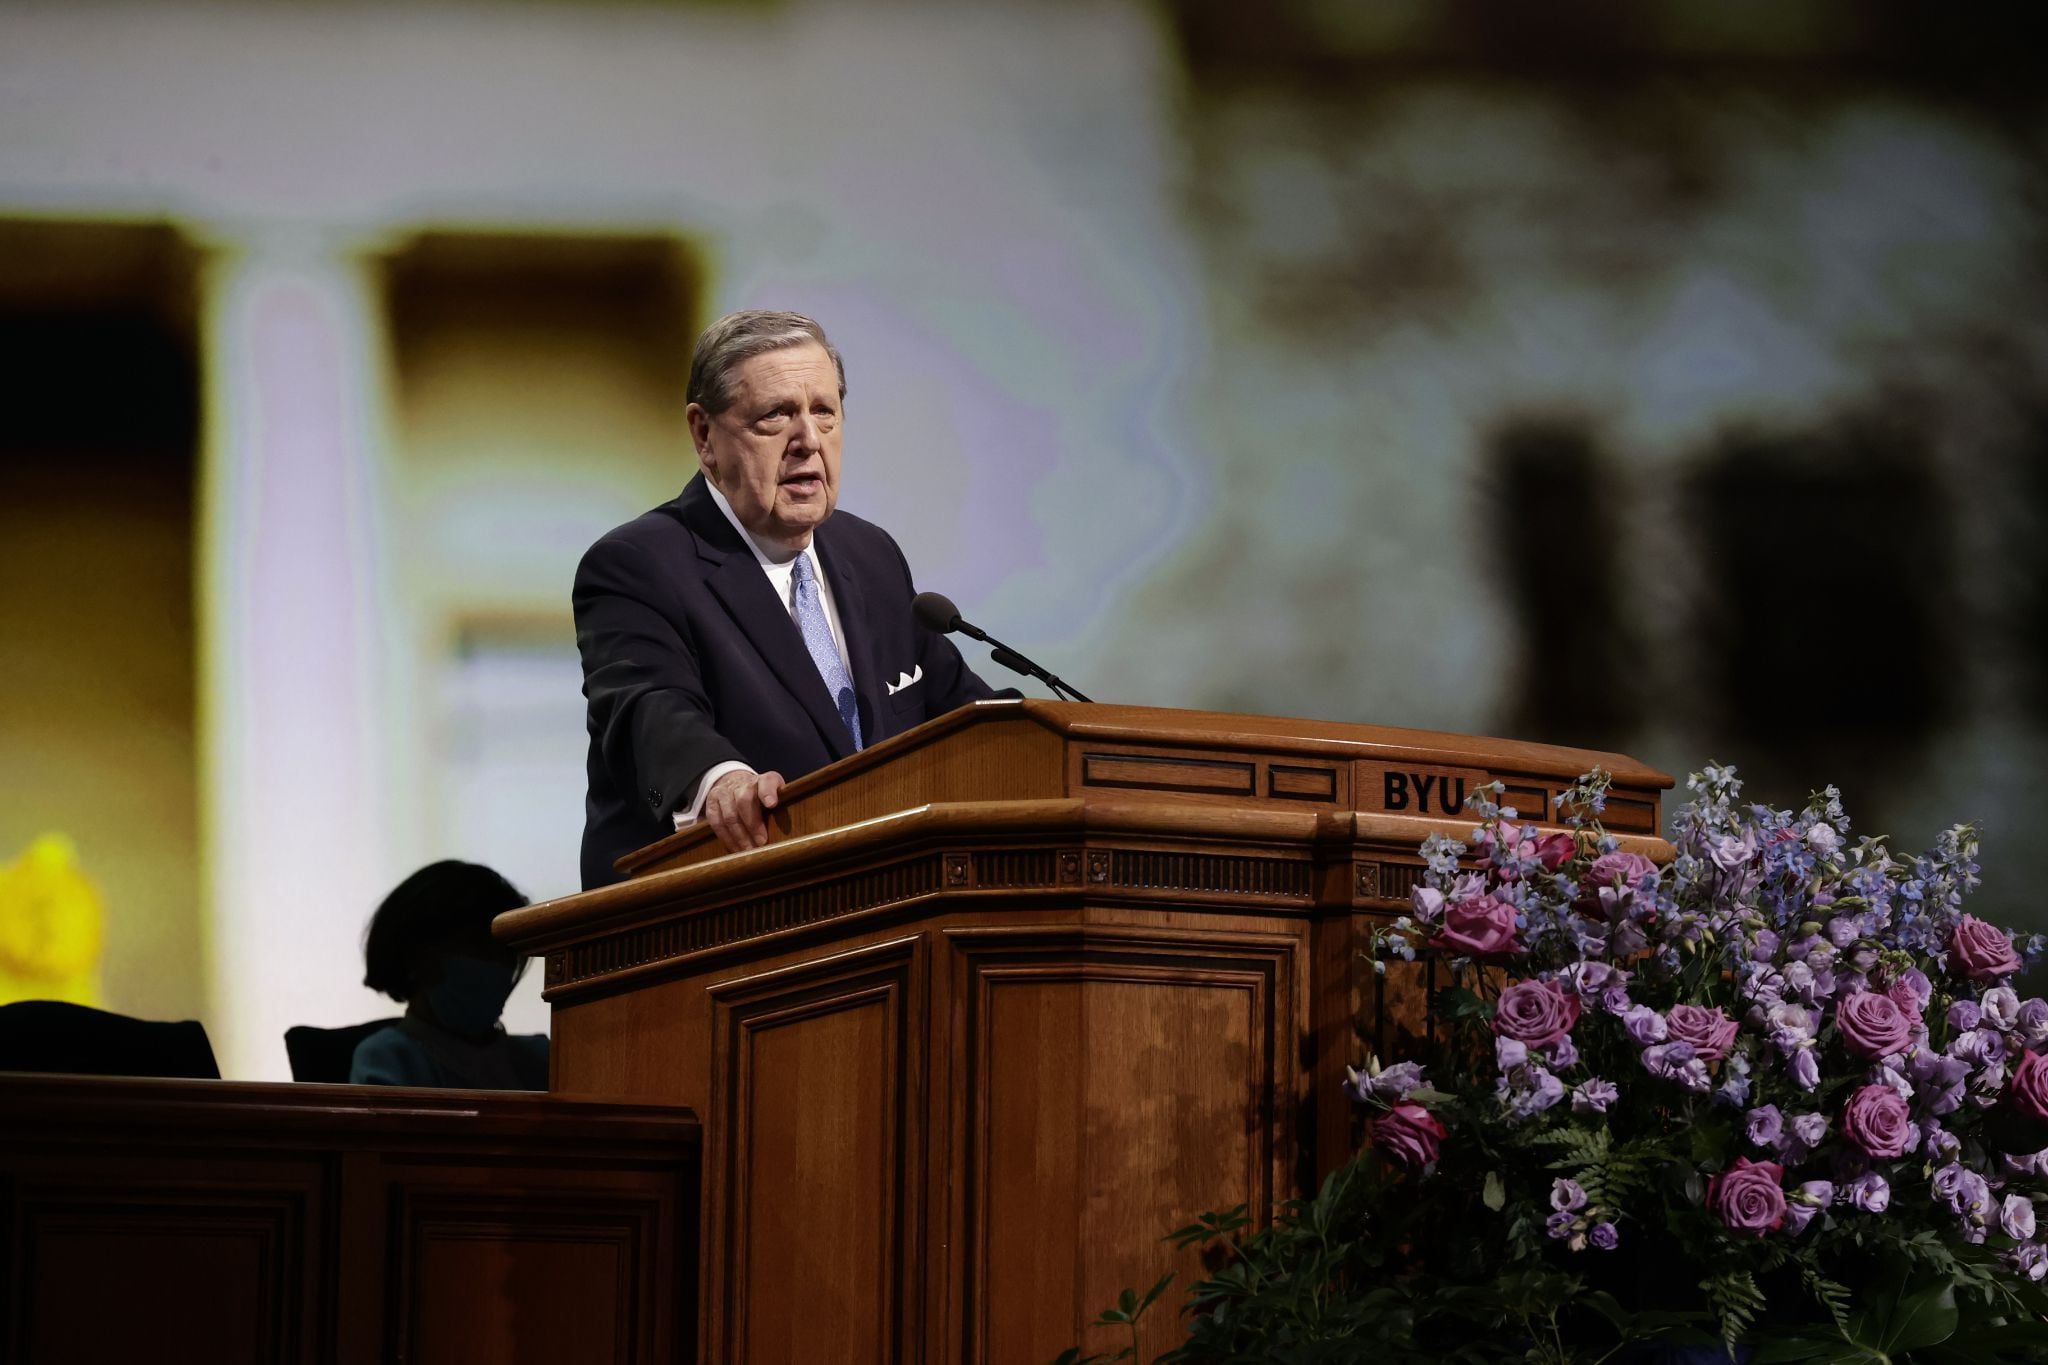 (The Church of Jesus Christ of Latter-day Saints)
Apostle Jeffrey R. Holland speaks to faculty at Brigham Young University on Aug. 23, 2021.